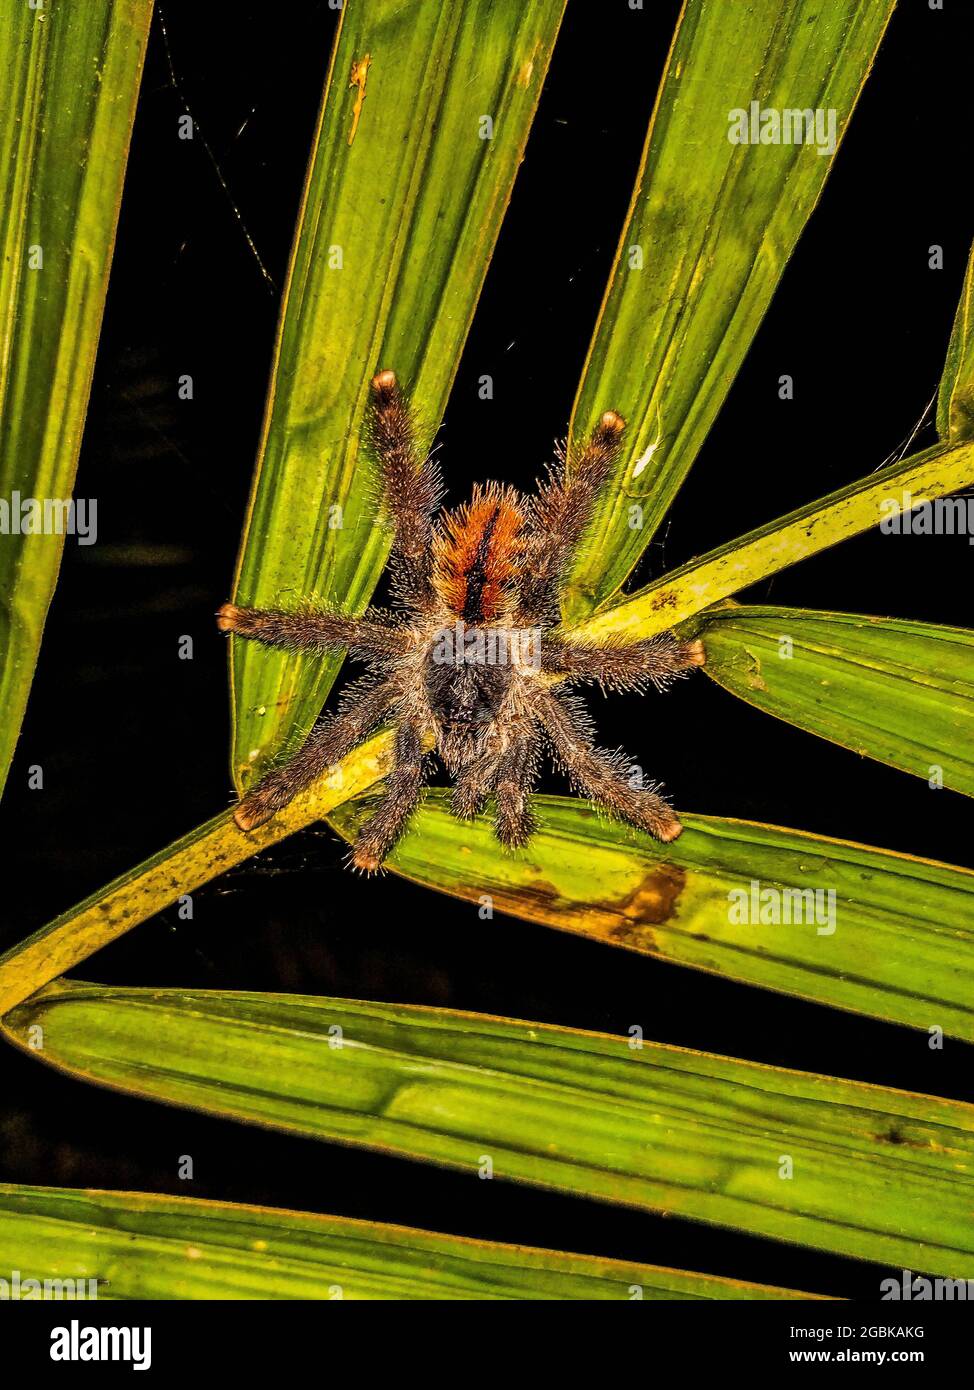 Brazilian Spider (Caranguejeira), waiting for the prey approaching on the thatched roof. Stock Photo